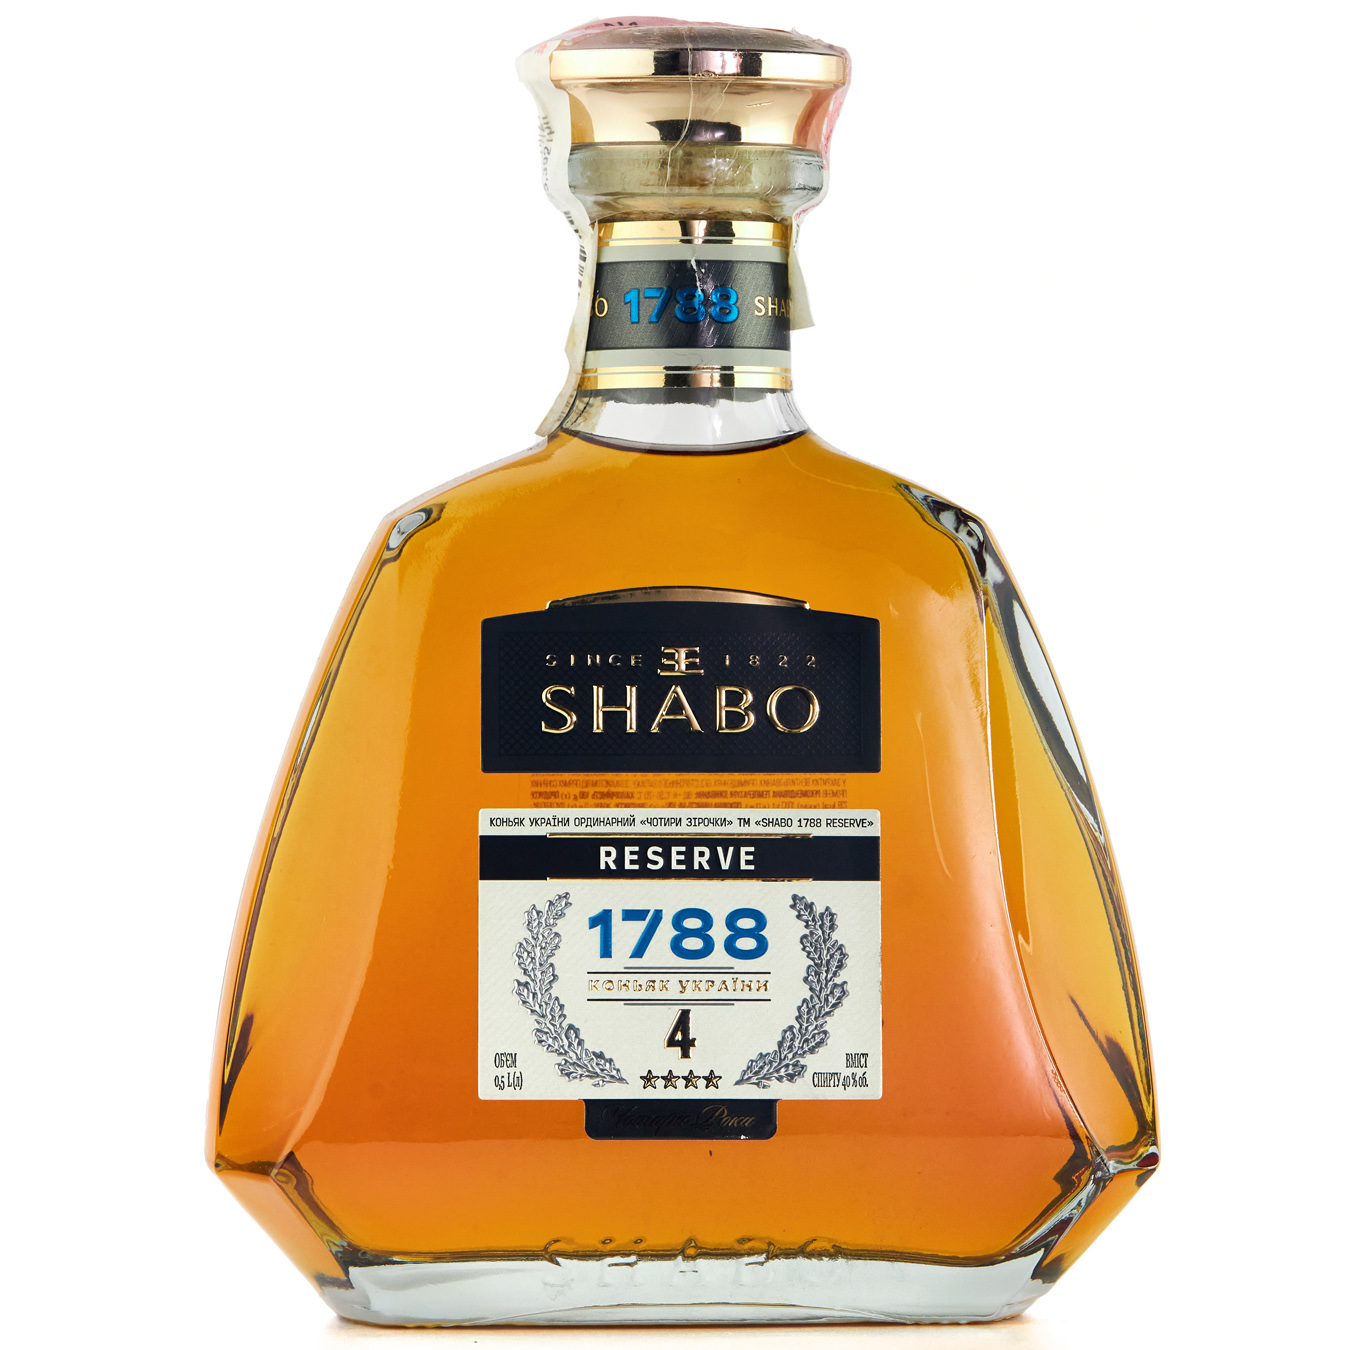 Shabo Reserve 1788 4 years Cognac 40% 0,5l